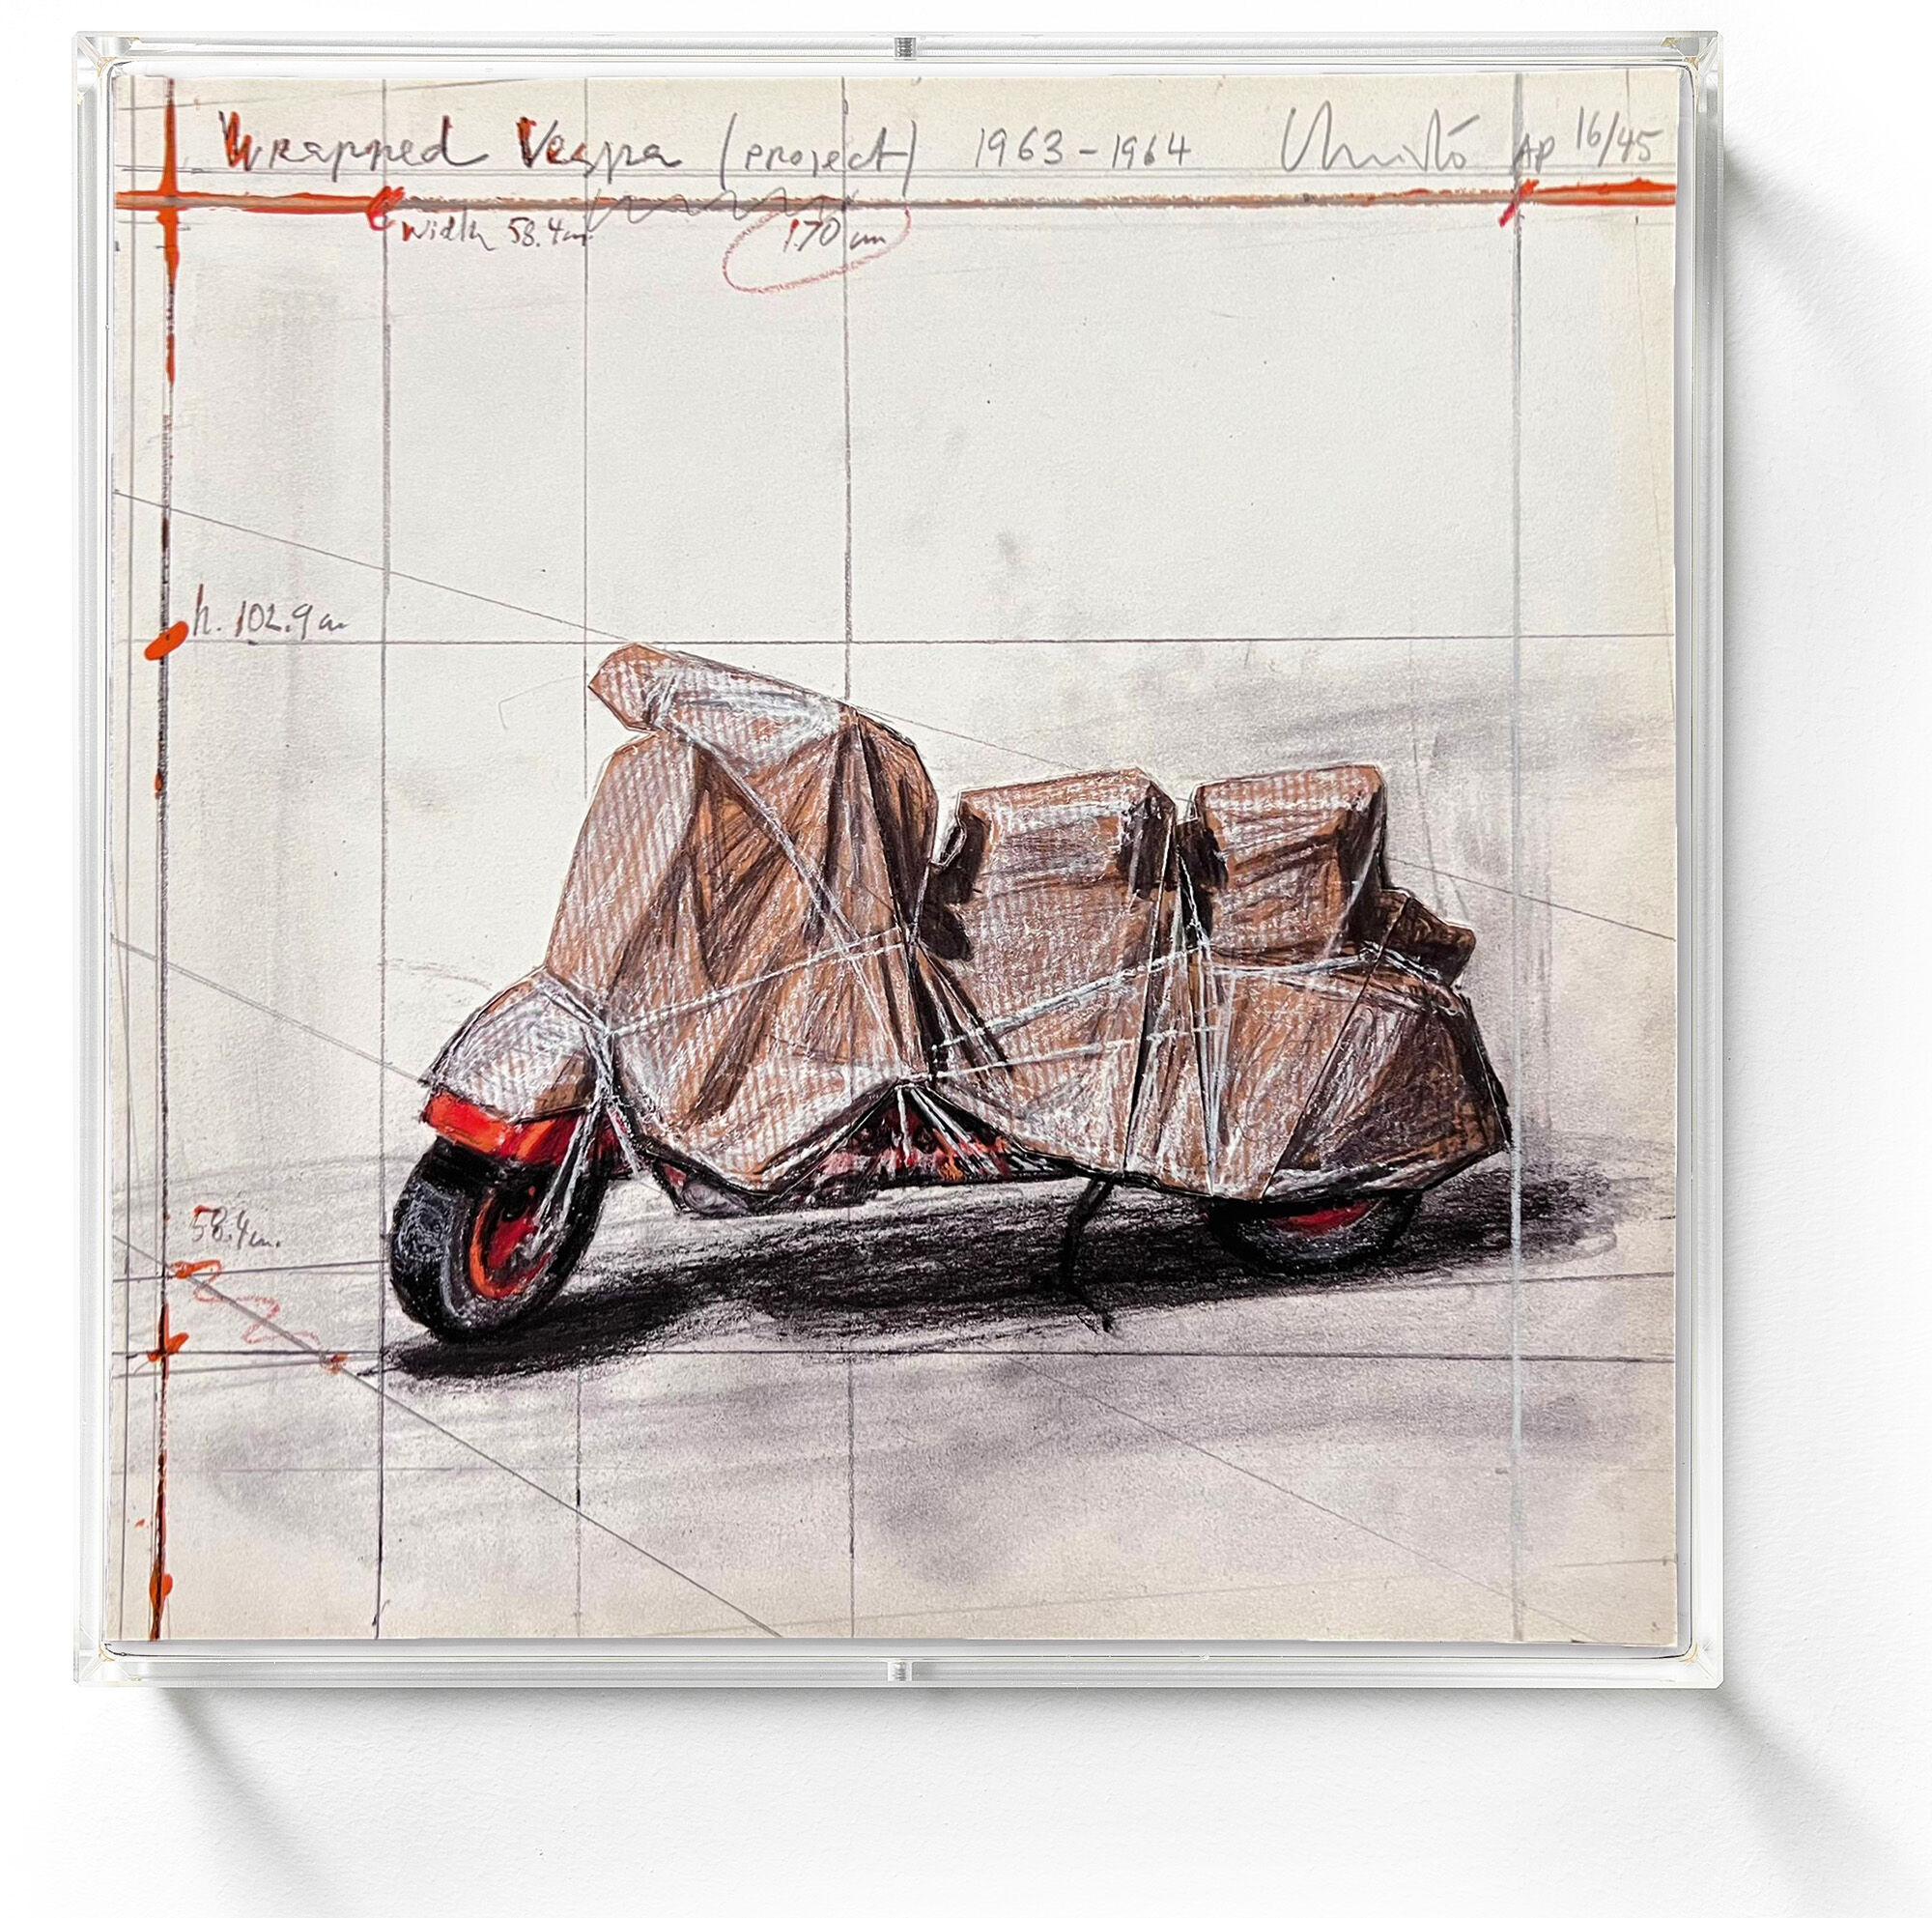 Picture "Wrapped Vespa" (2009) by Christo